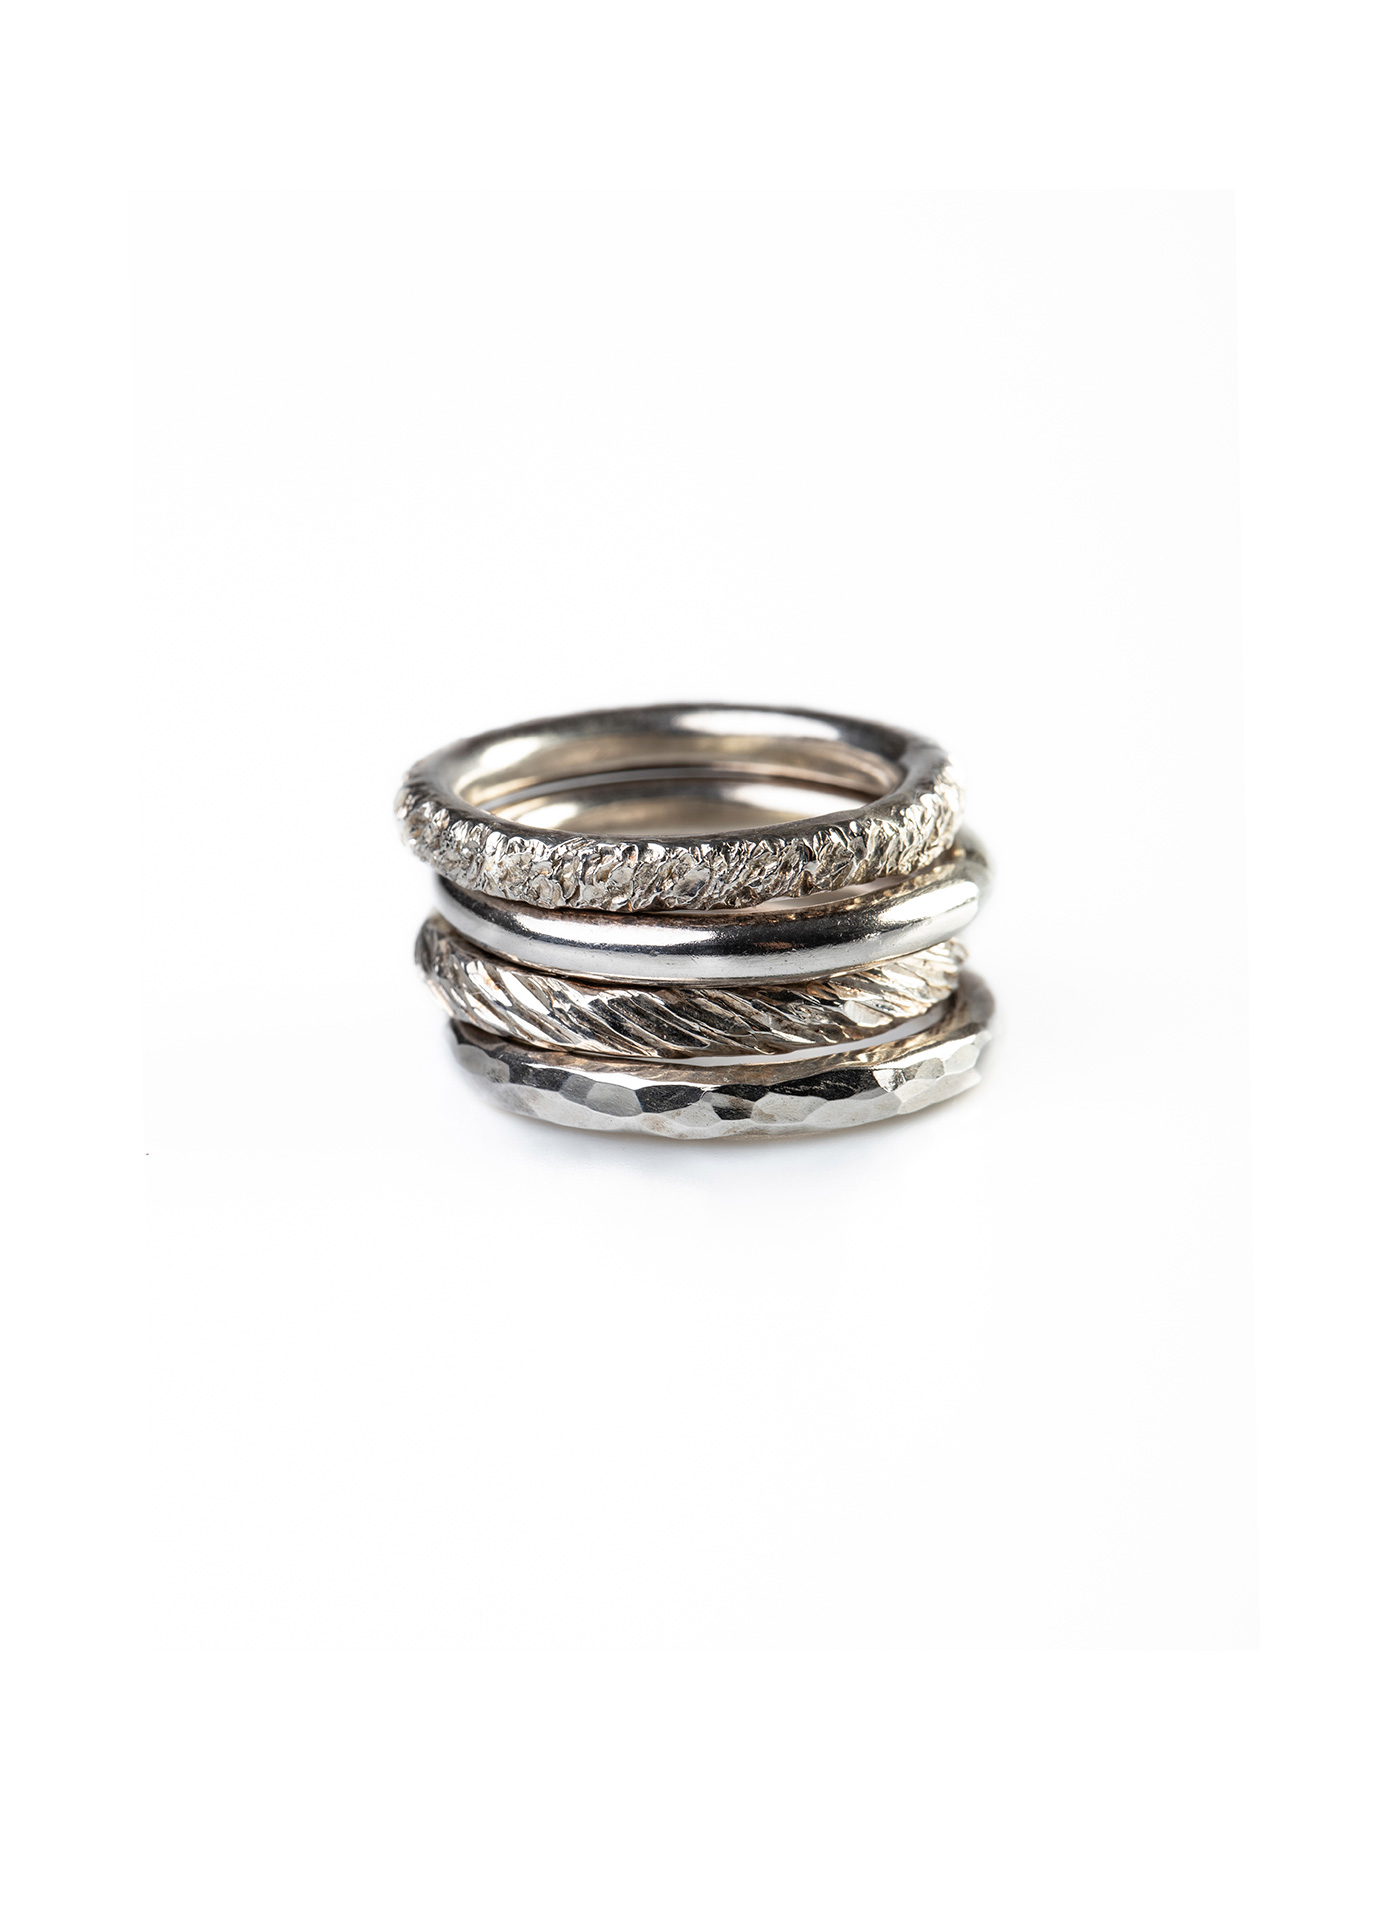 hide-m | CHIN TEO Transmission 4 Rings Set, polished 925sterling silver